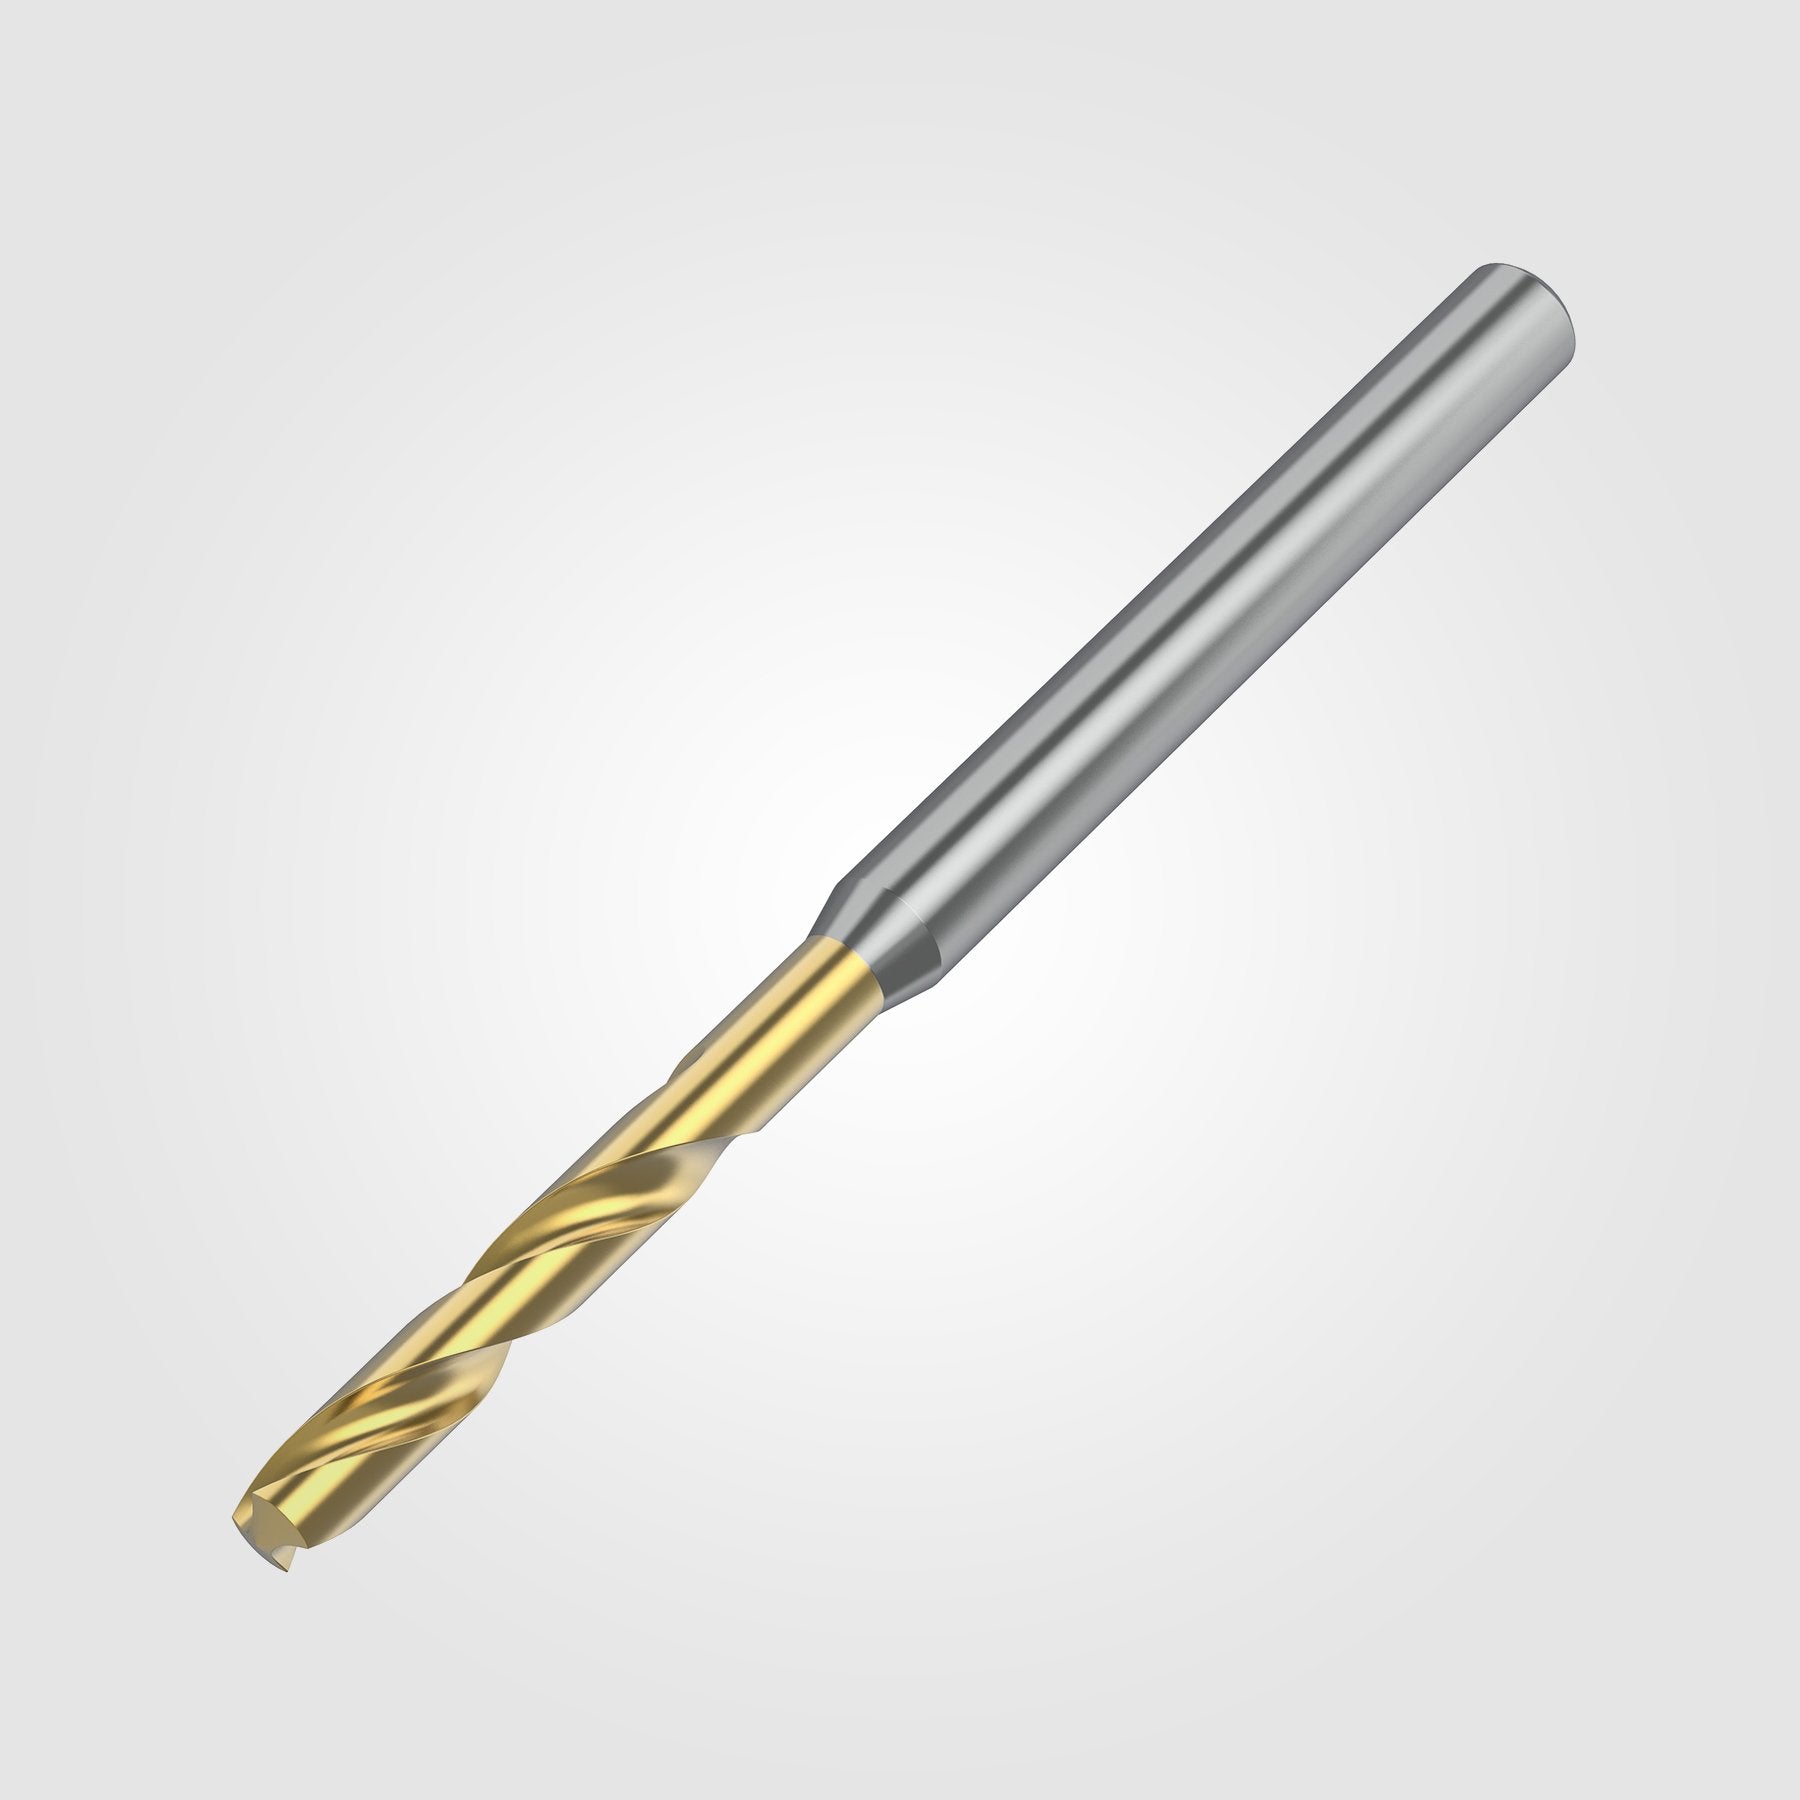 GOdrill (THROUGH COOLANT) | 11.509mm / .4531" / 5xD | SOLID CARBIDE DRILL | 4149309